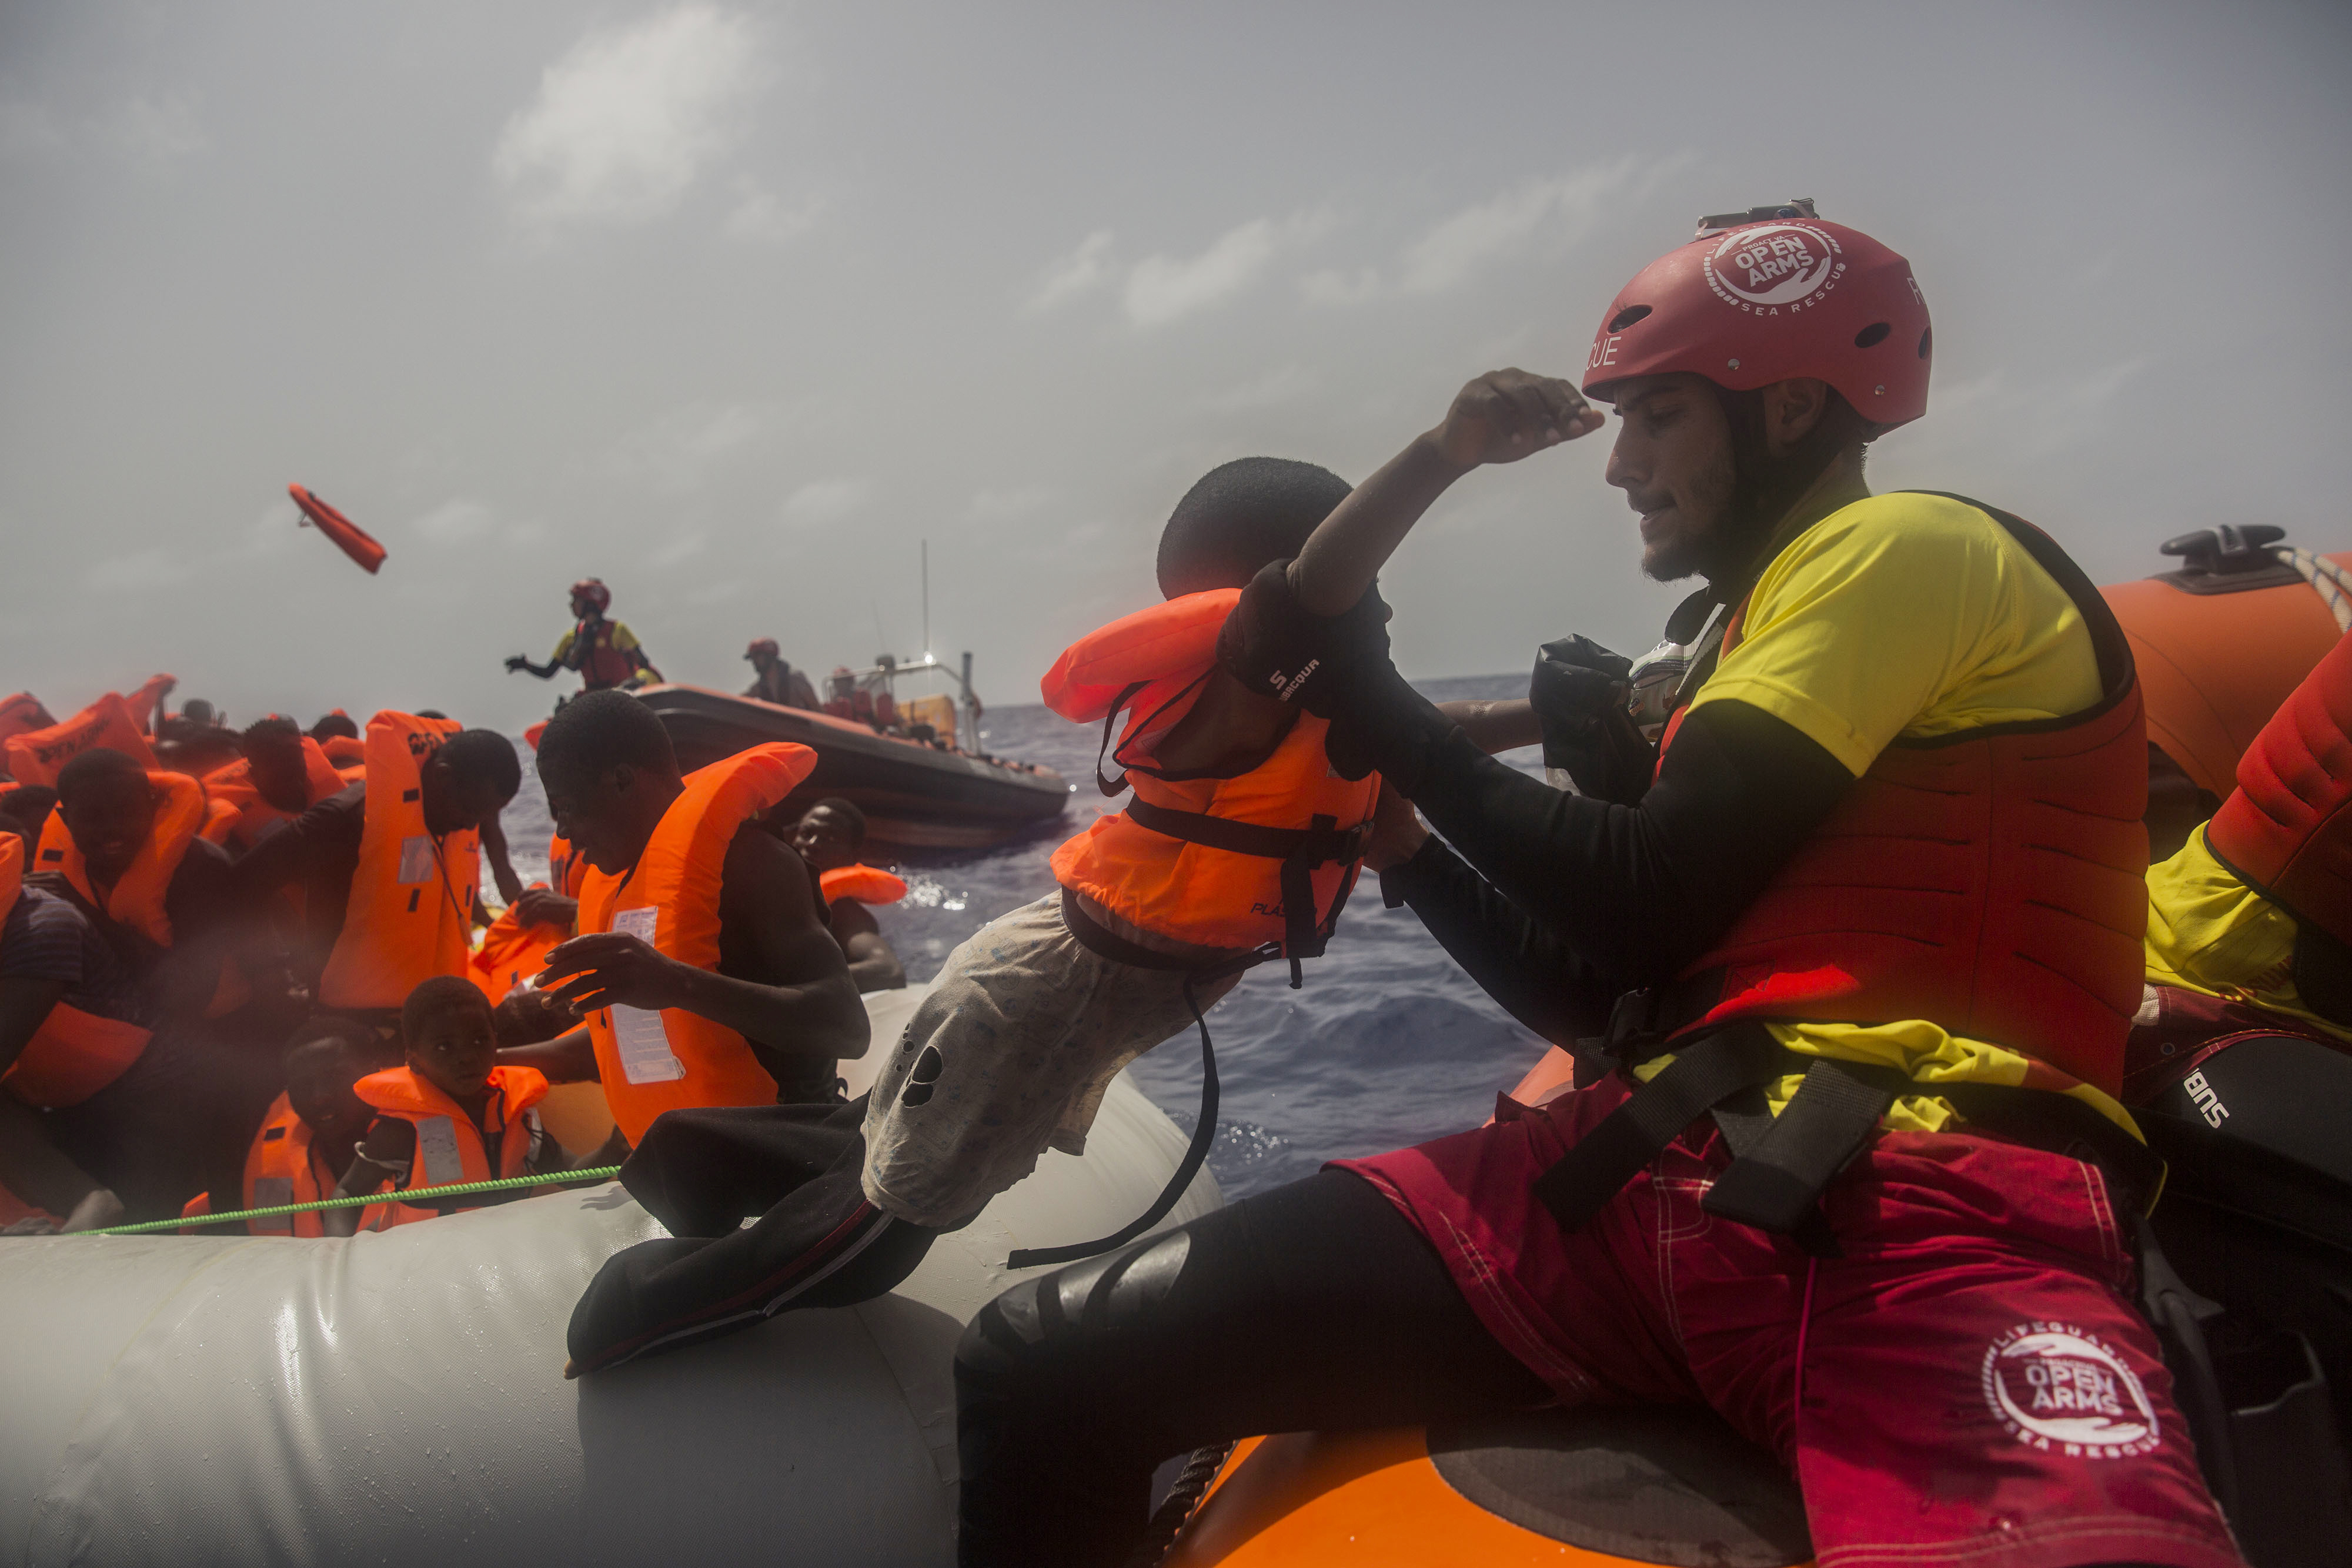 Sub saharan migrants are rescued by aid workers of Spanish NGO Proactiva Open Arms in the Mediterranean Sea, about 15 miles north of Sabratha, Libya on Tuesday, July 25, 2017. (AP Photo/Santi Palacios)